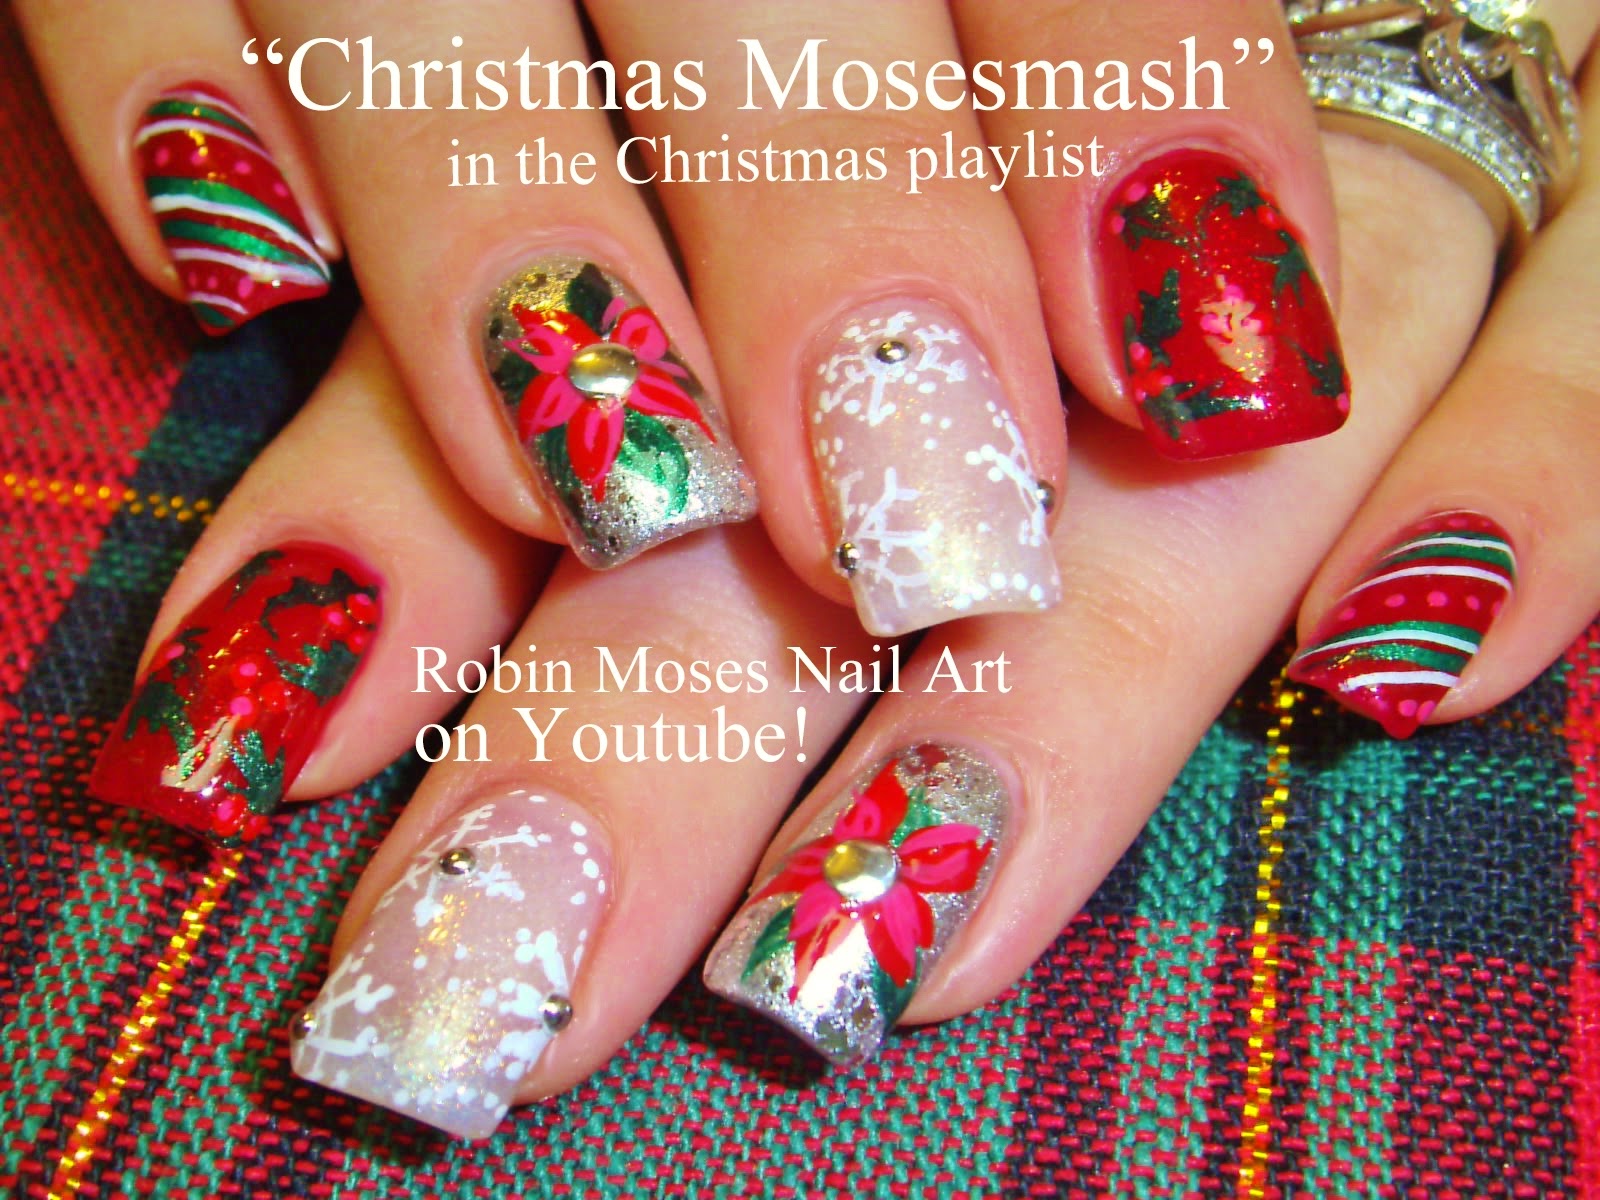 7. 10 Easy Christmas Nail Art Designs - wide 6